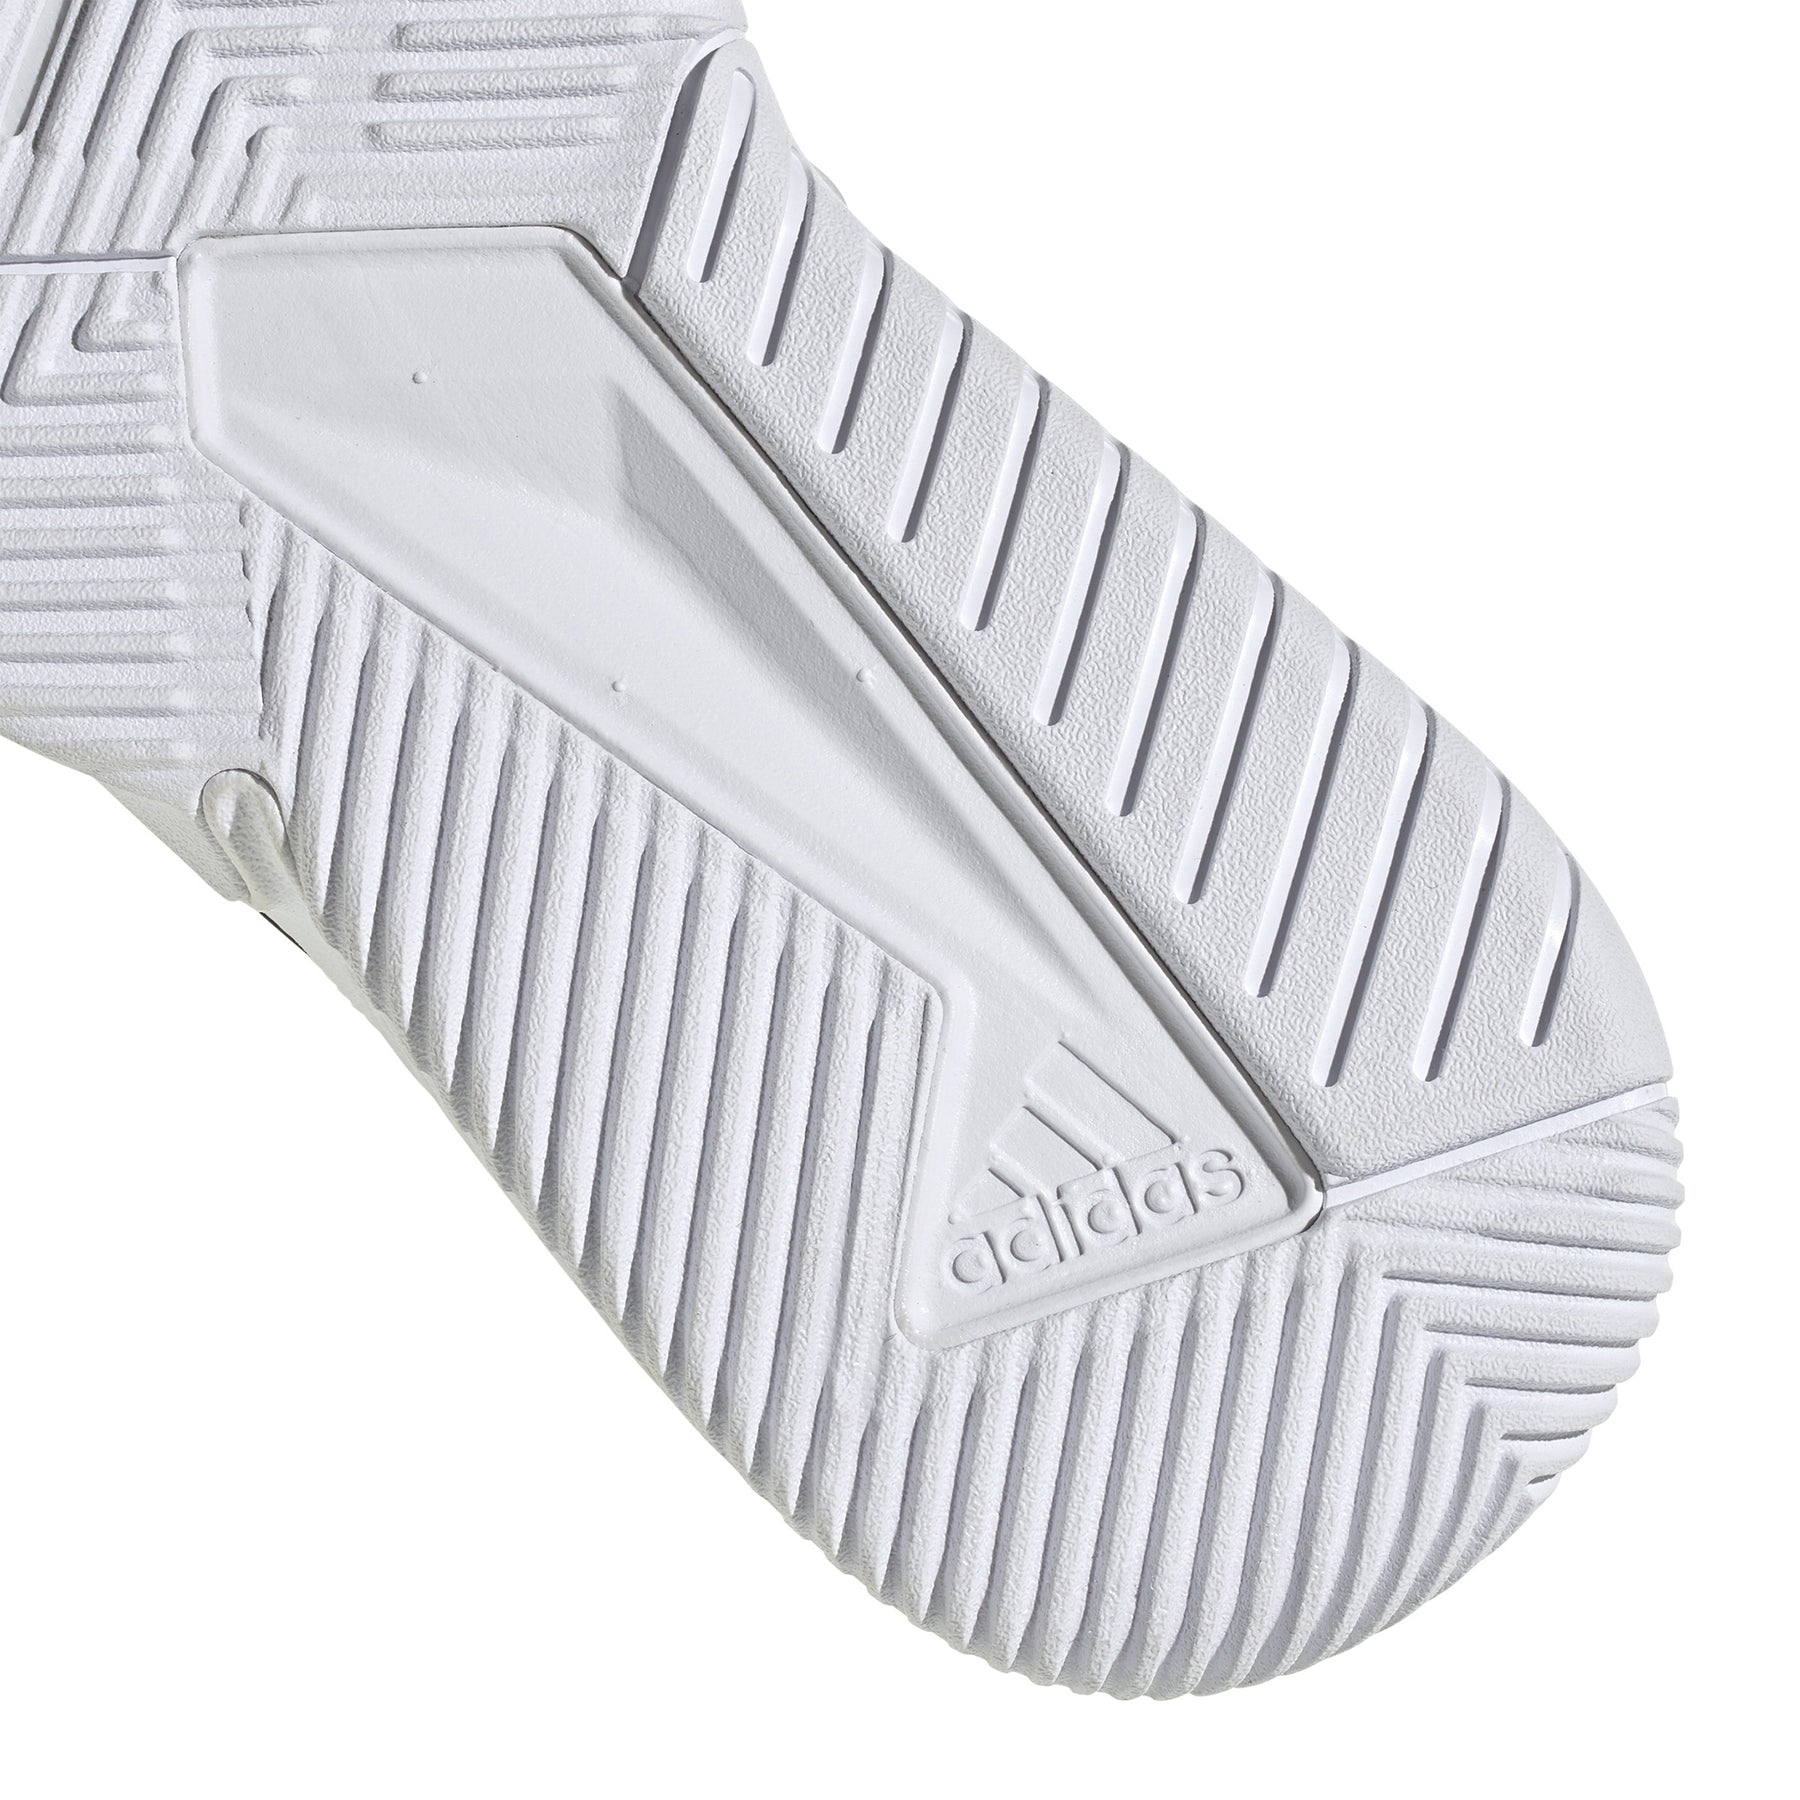 Adidas Court Team Bounce Womens Indoor Shoes: White